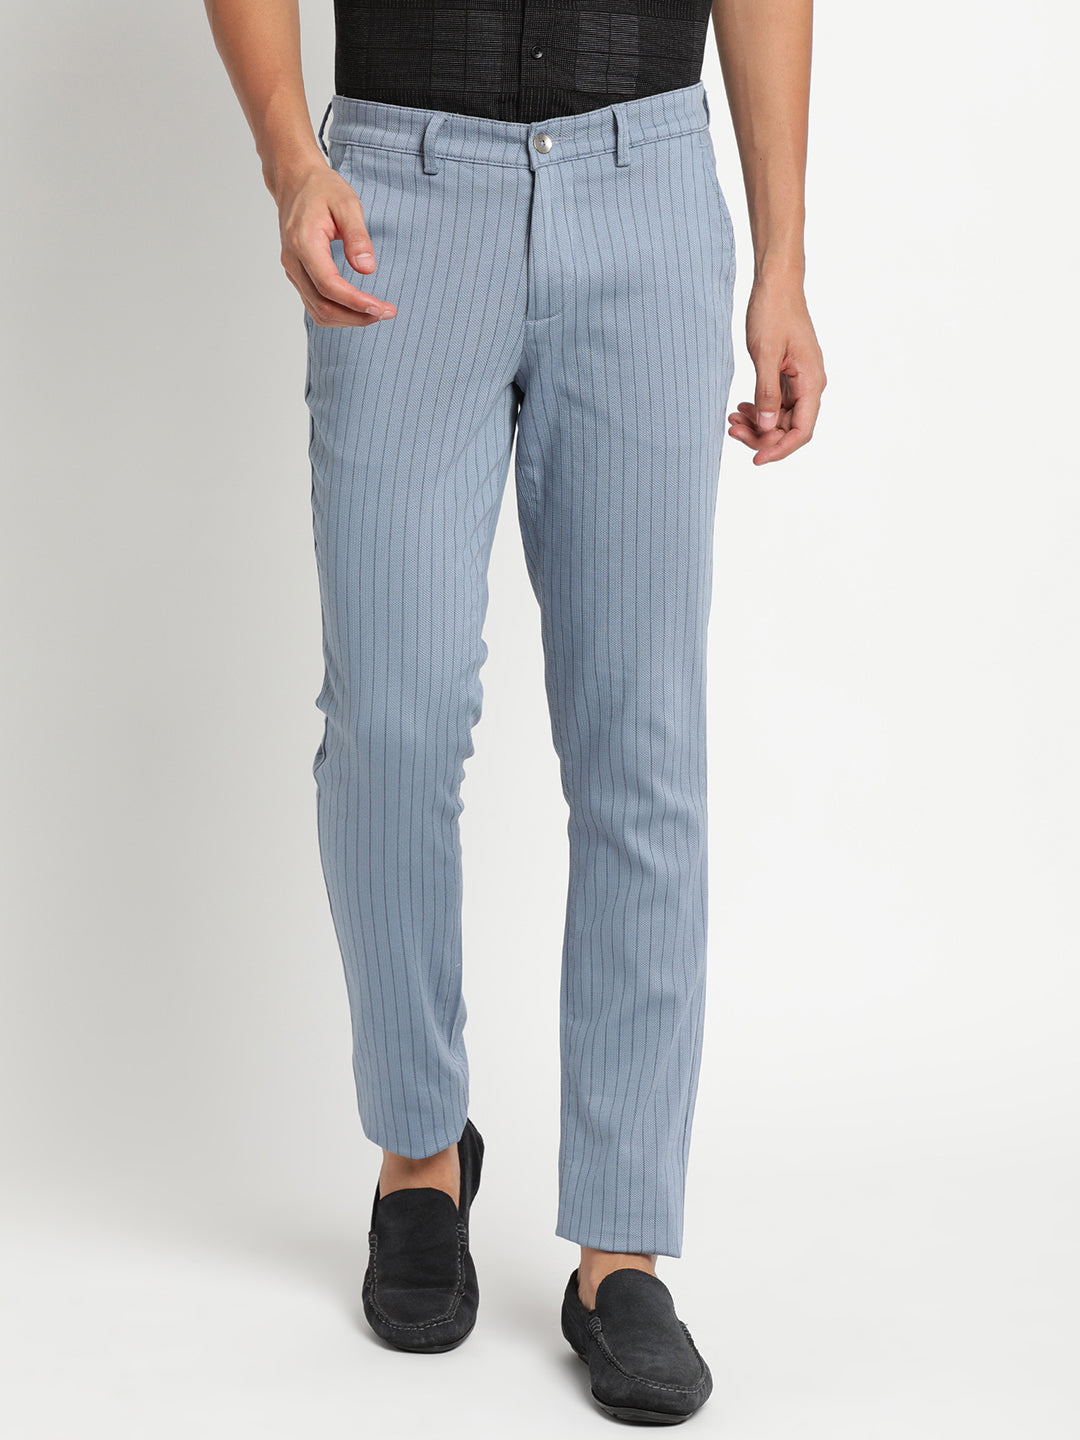 Cotton Stretch Sky Blue Striped Narrow Fit Flat Front Casual Trouser